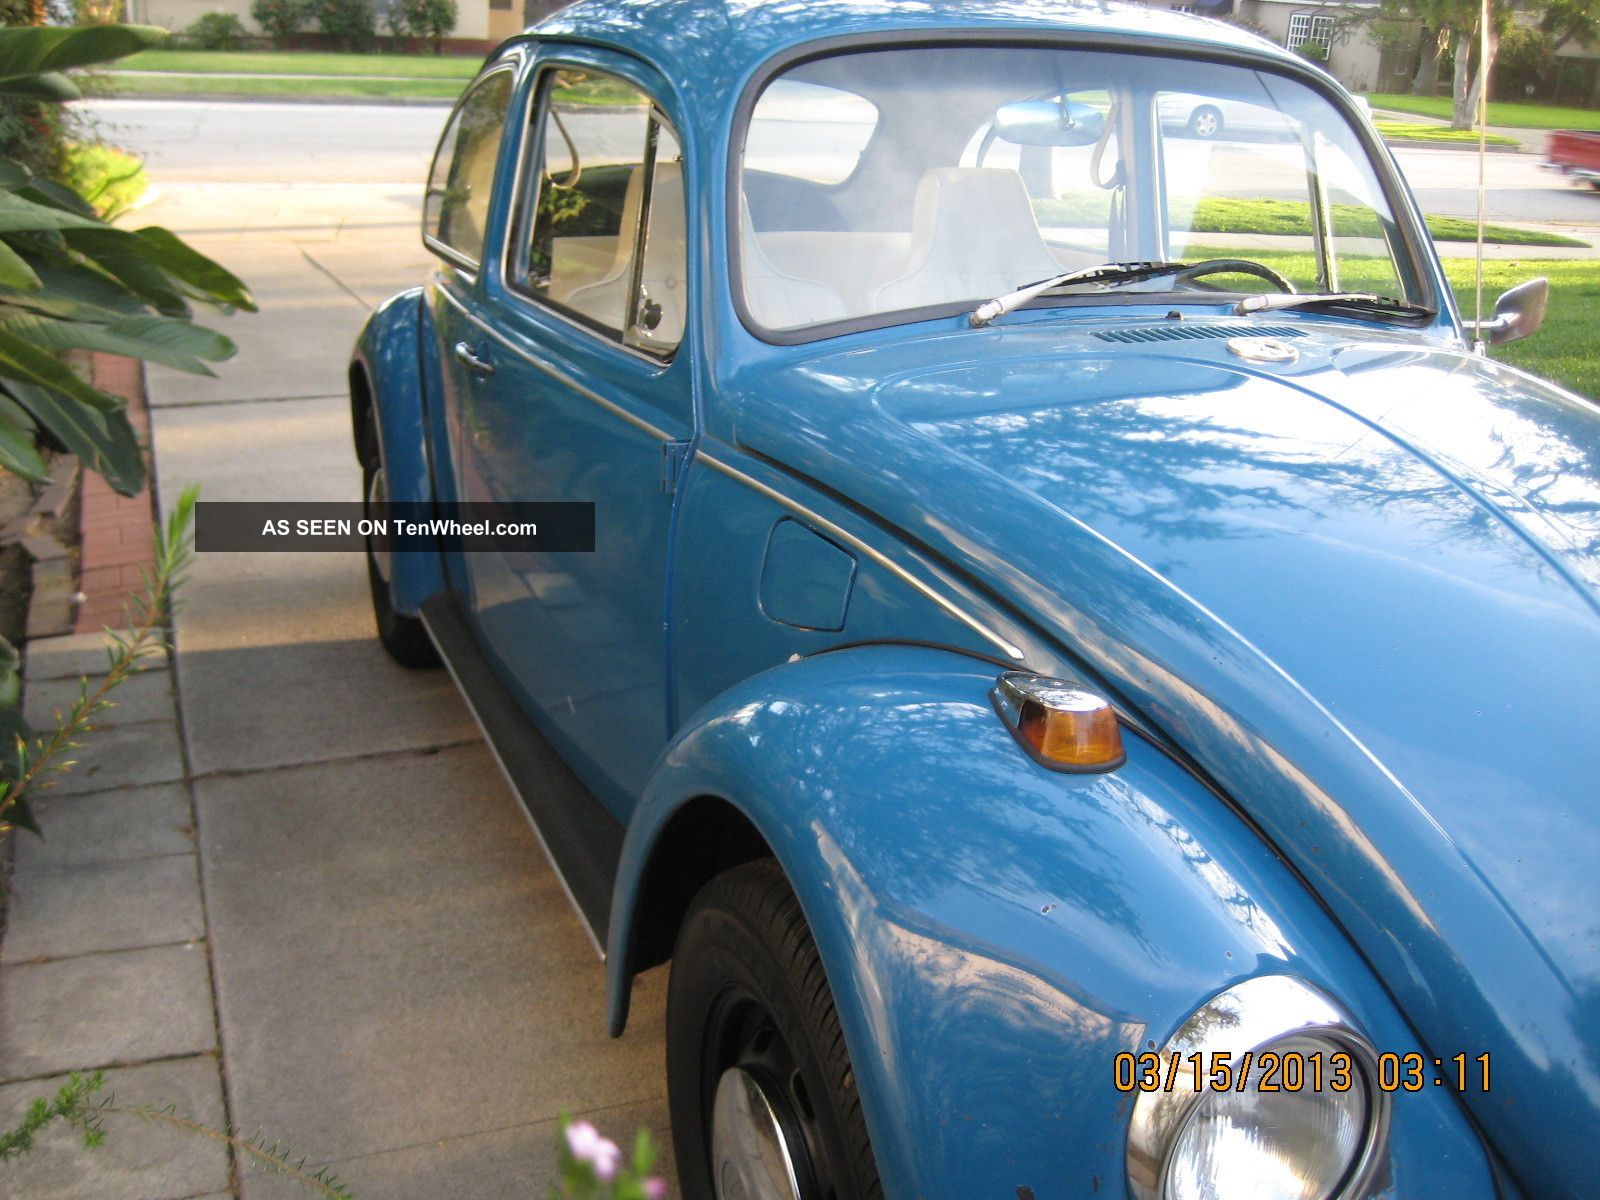 1969 Volkswagen Beetle - Vw Bug With And Pop - Out Rear ...